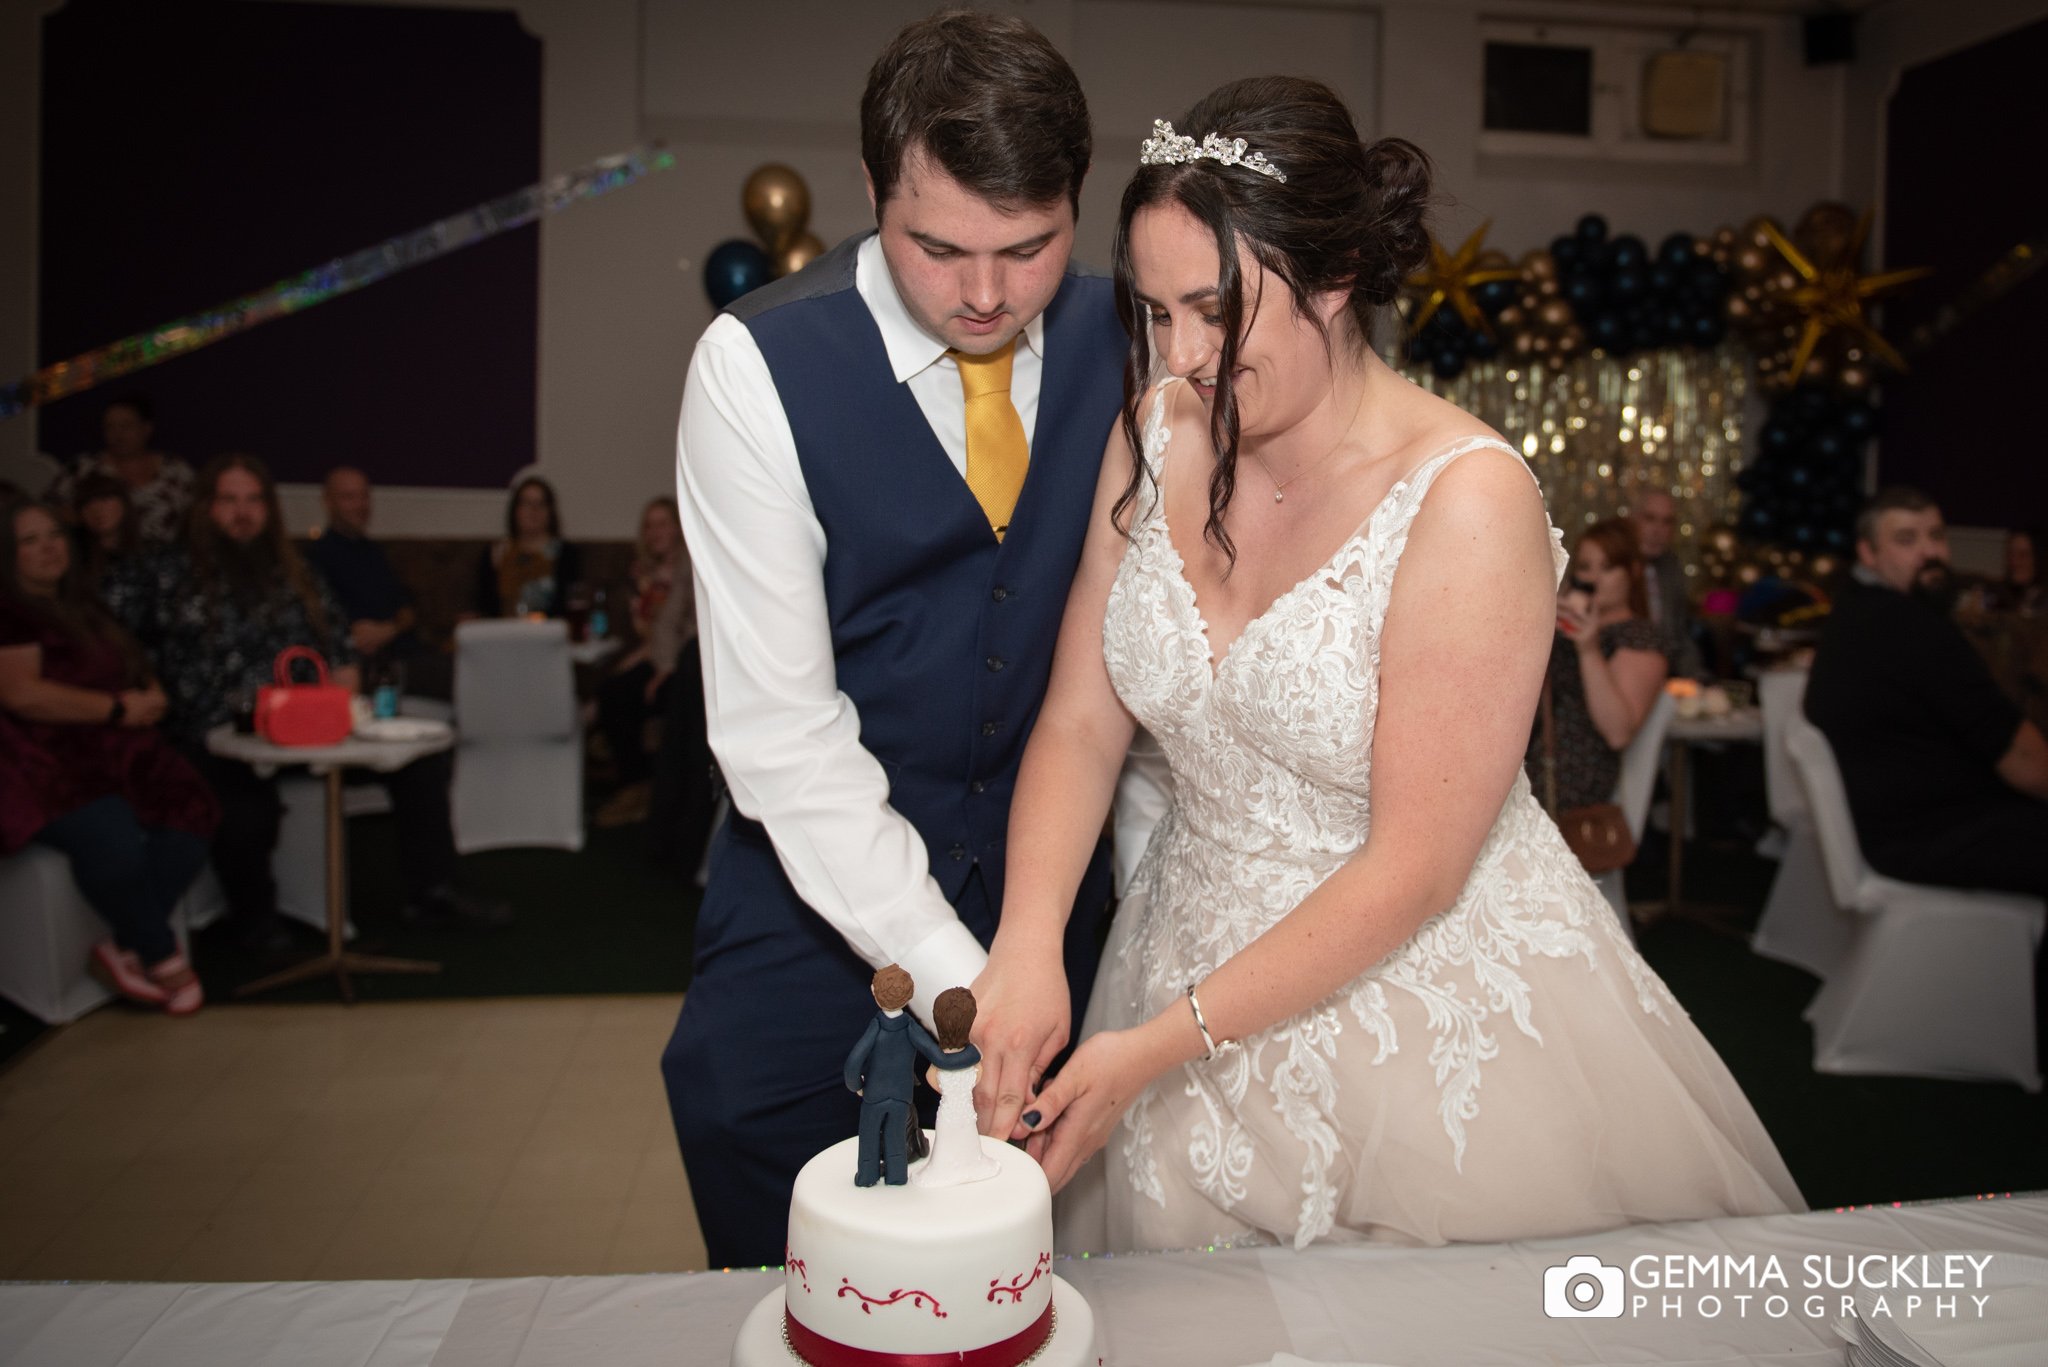 the bride and groom cutting their wedding cake